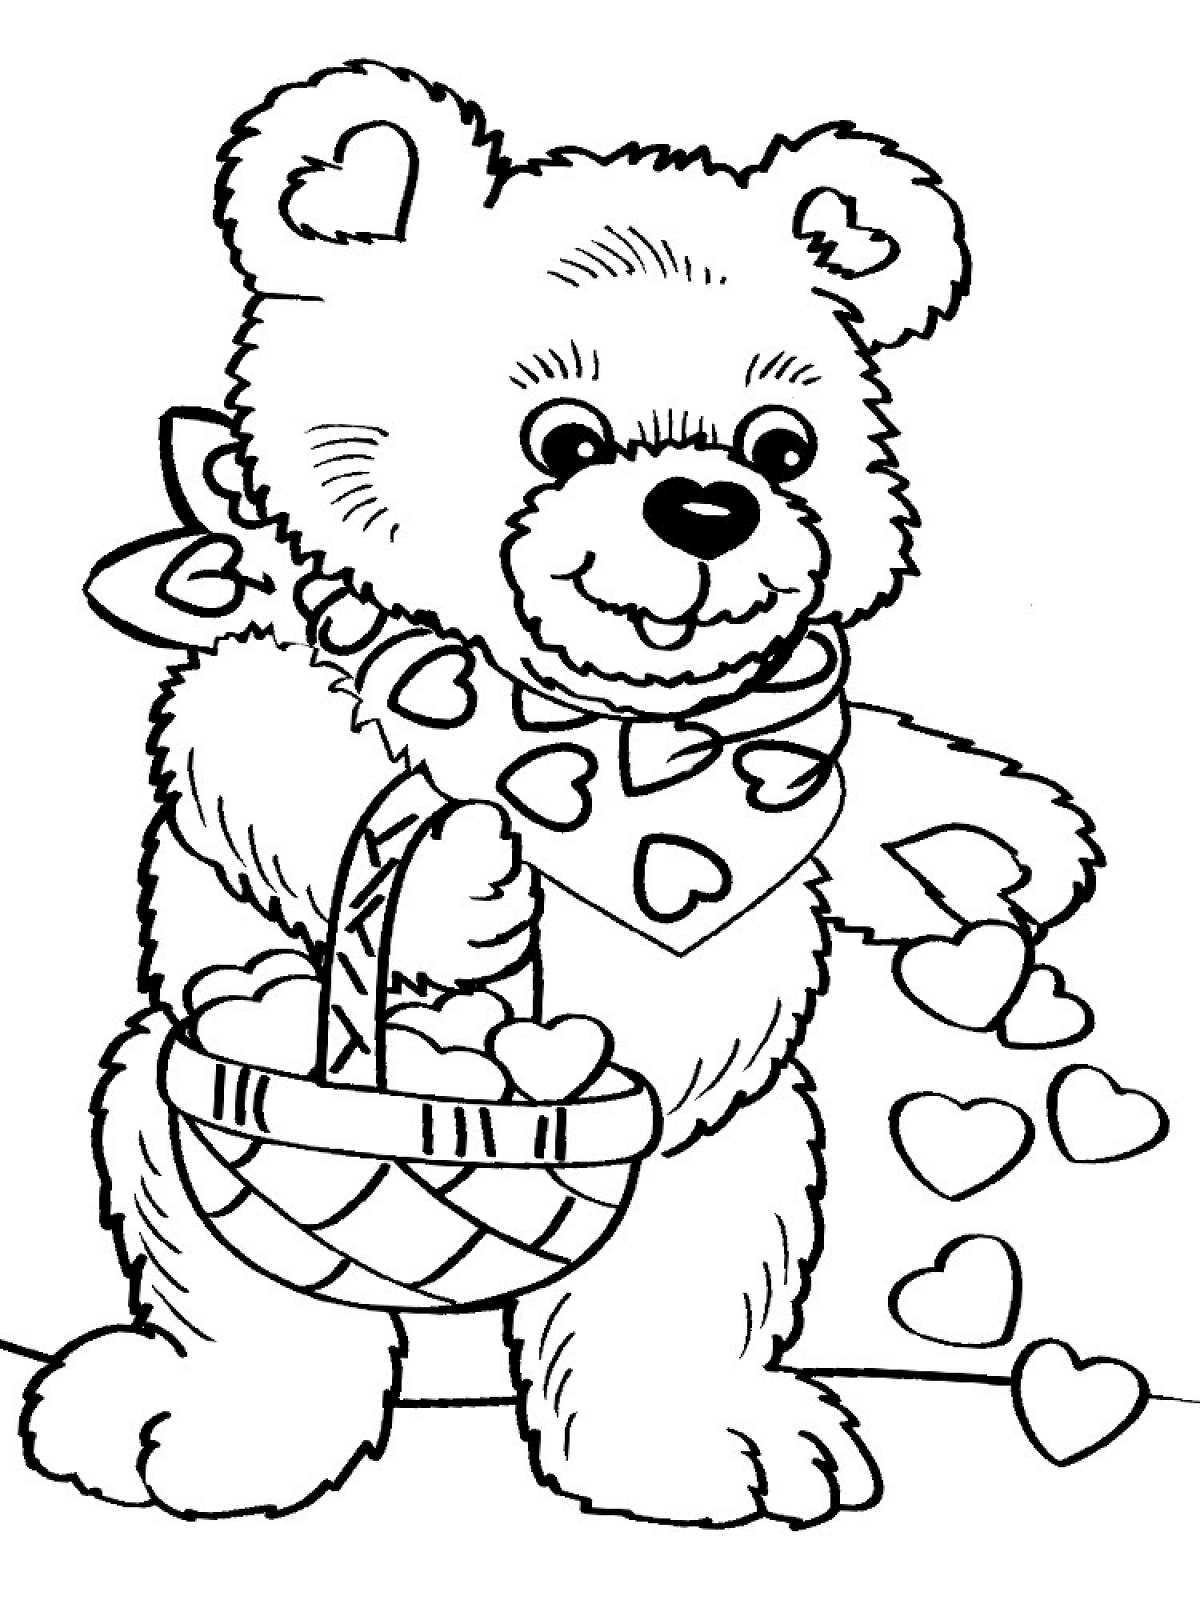 Teddy bear with a basket of hearts